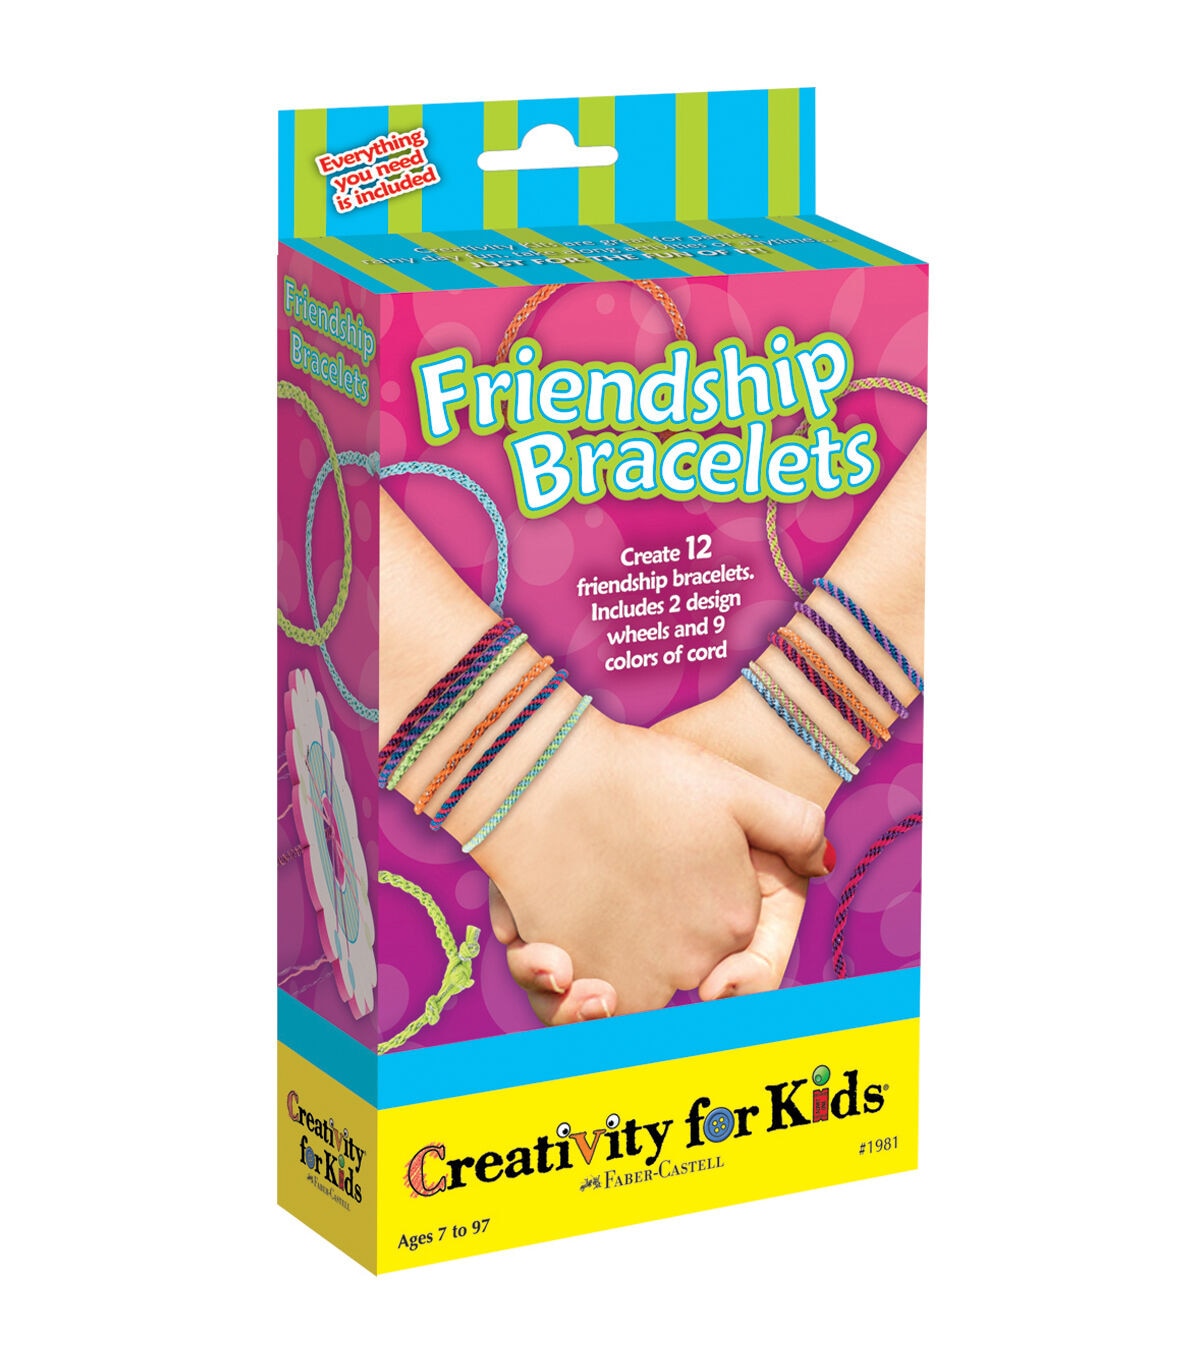 Arts And Crafts Friendship Bracelet Making Kit For Girls Arts And Crafts  Jewelry Making Toys For 5 6 7 8 9 10 11 12 Years Old Gifts For Kids 230923  From Tuo09, $15.99 | DHgate.Com